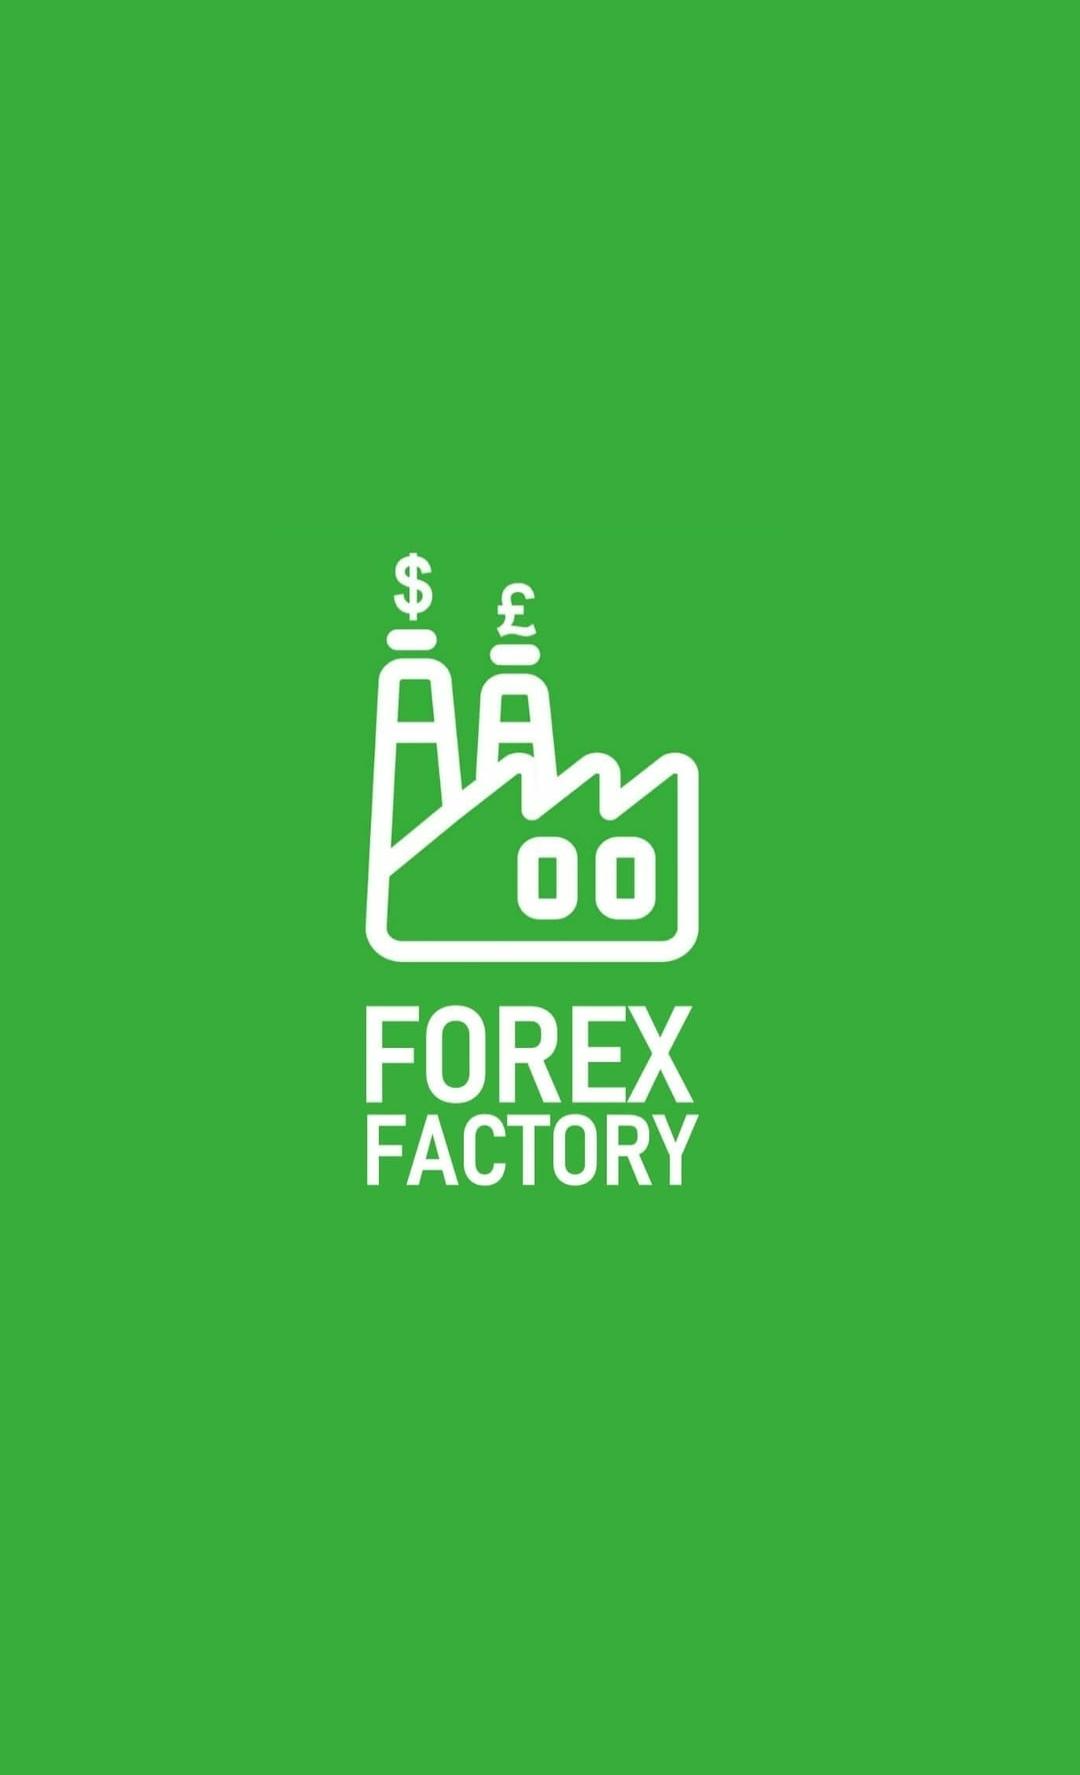 Forex Factory News for Android - APK Download